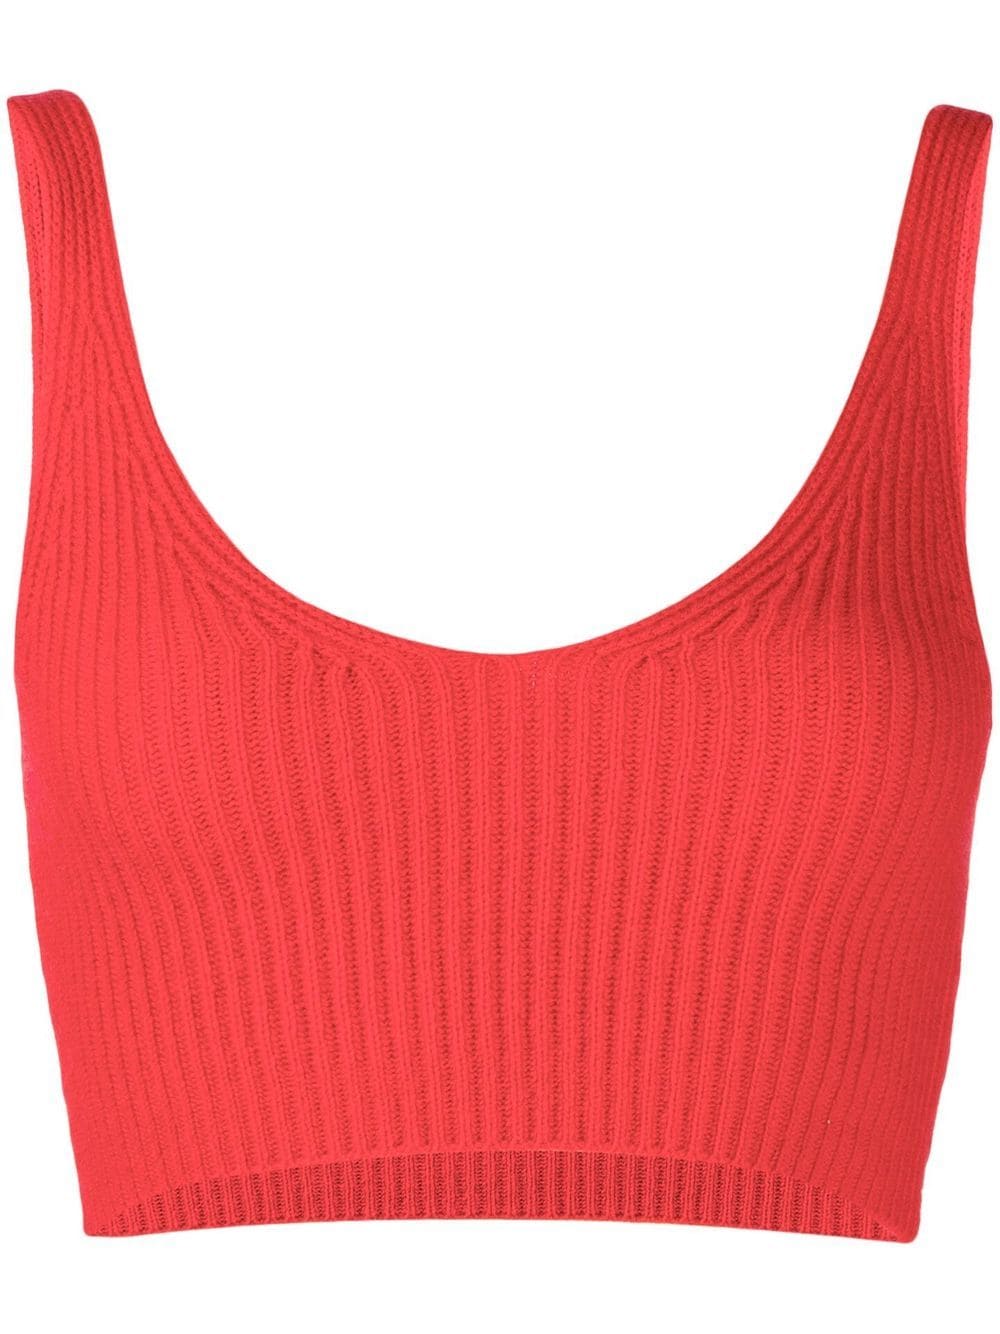 Cashmere In Love Reese cashmere-blend bralette